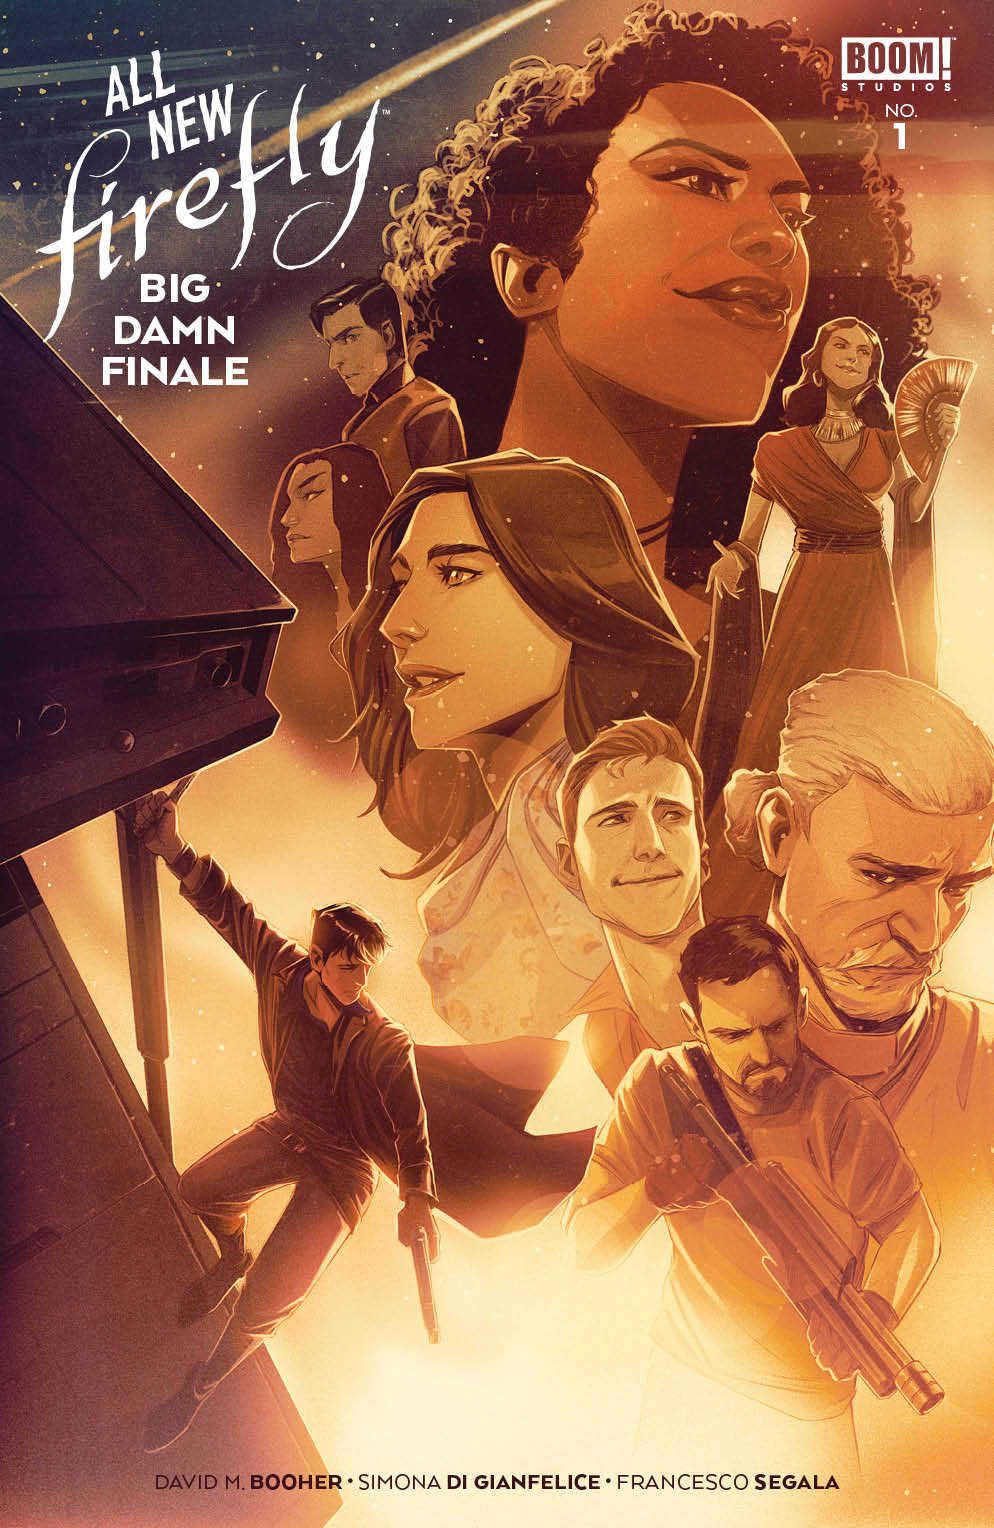 The All-New Firefly: Big Demon Finale